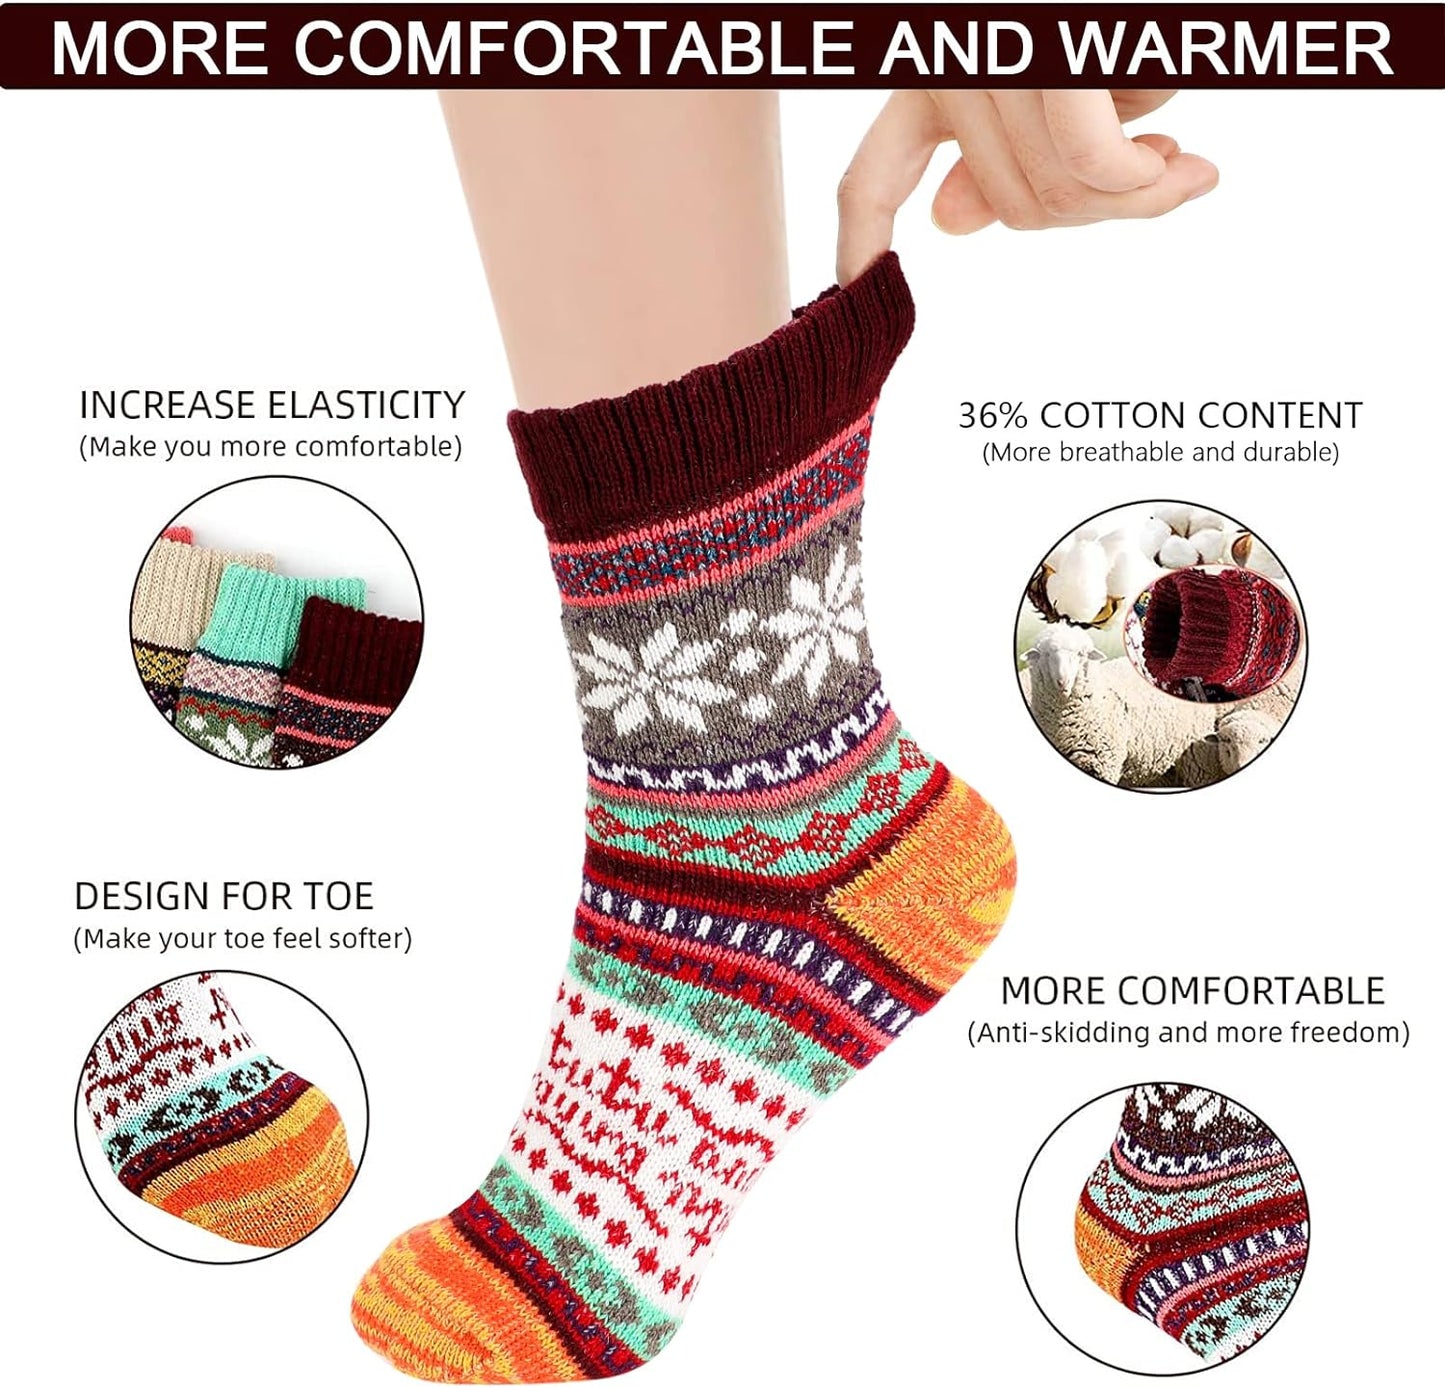 Thermal Winter Women Socks 5 Pairs Wool Warm Knitting Ladies Socks Vintage Style Soft Cotton Thick Woman Bed Sock Multicoloured for Home Office School Hiking, Ideal Christmas Gifts for Women